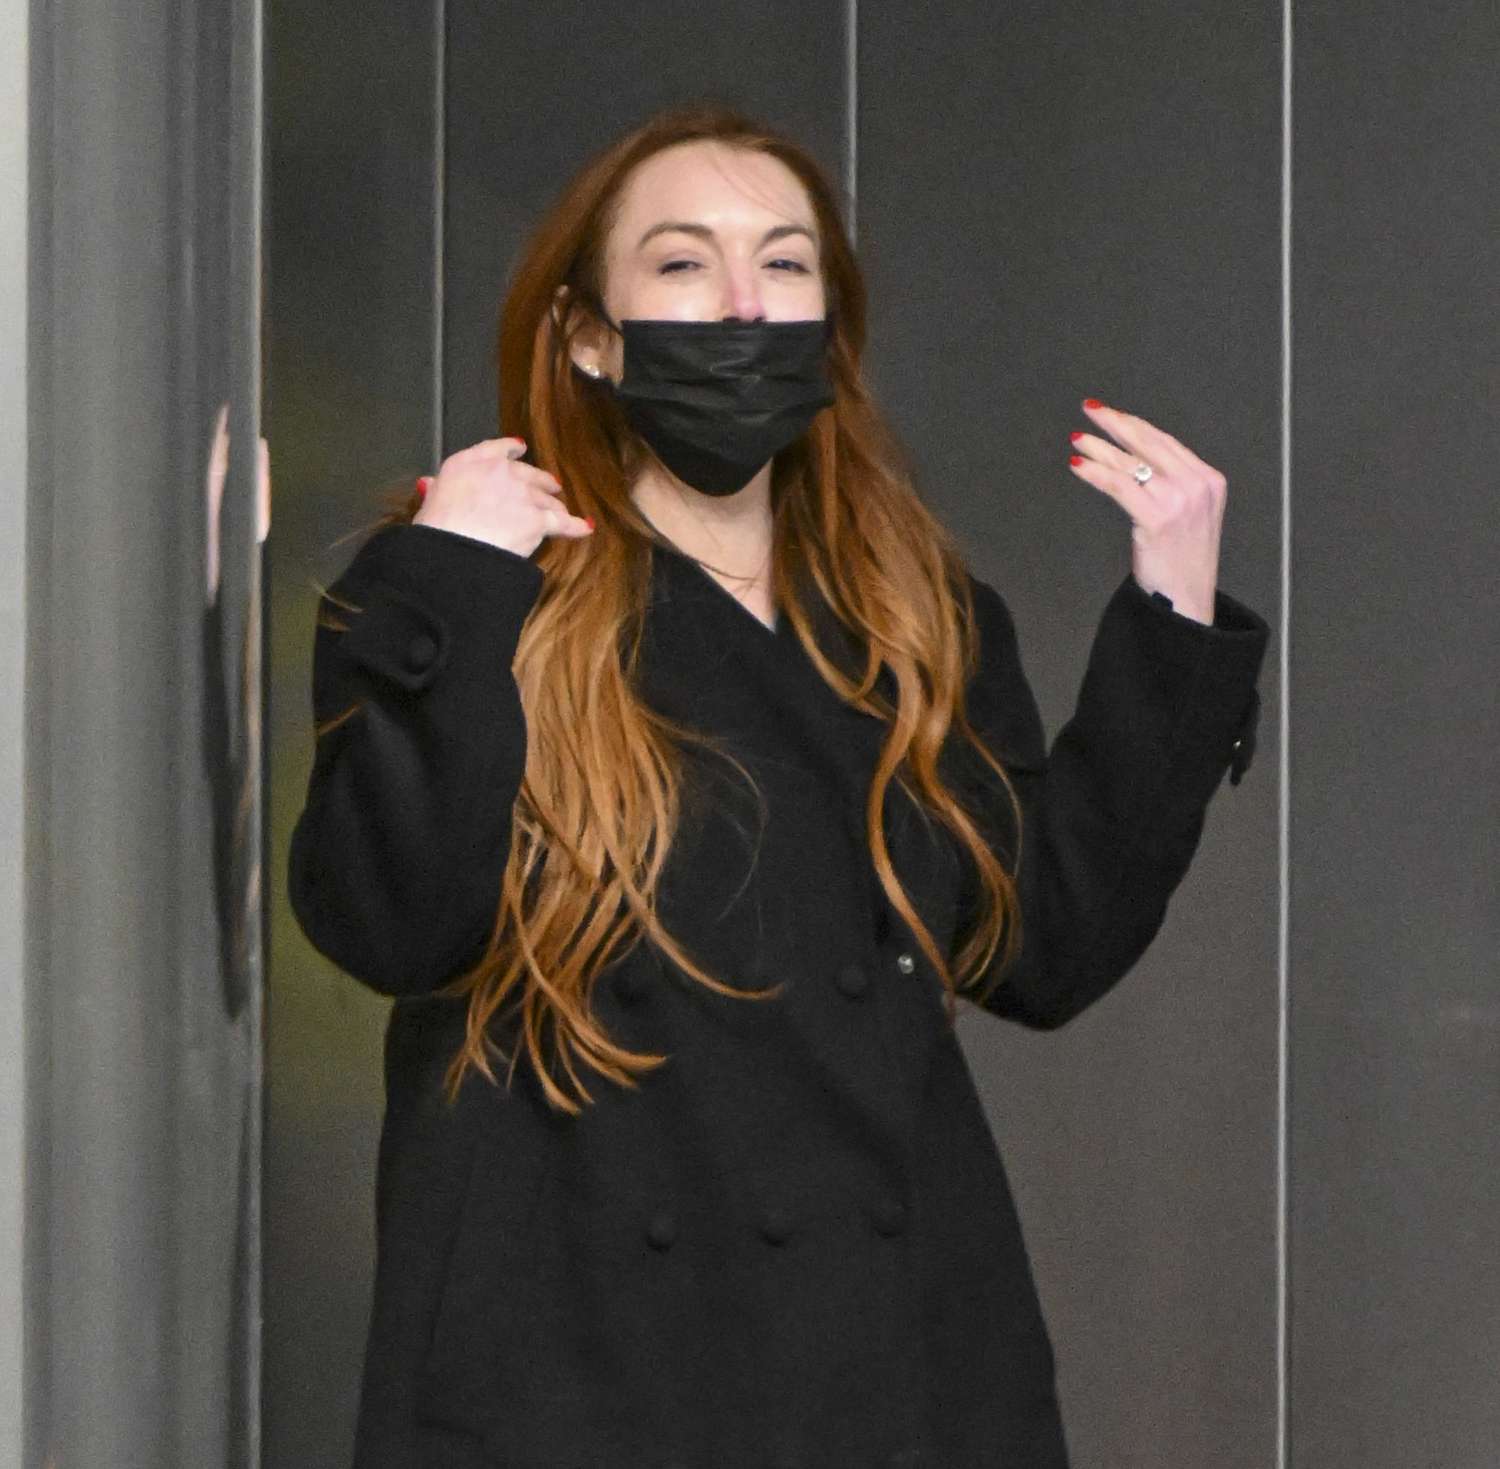 Lindsay Lohan Flashes Her Engagement Ring With Fiance in JFK New York